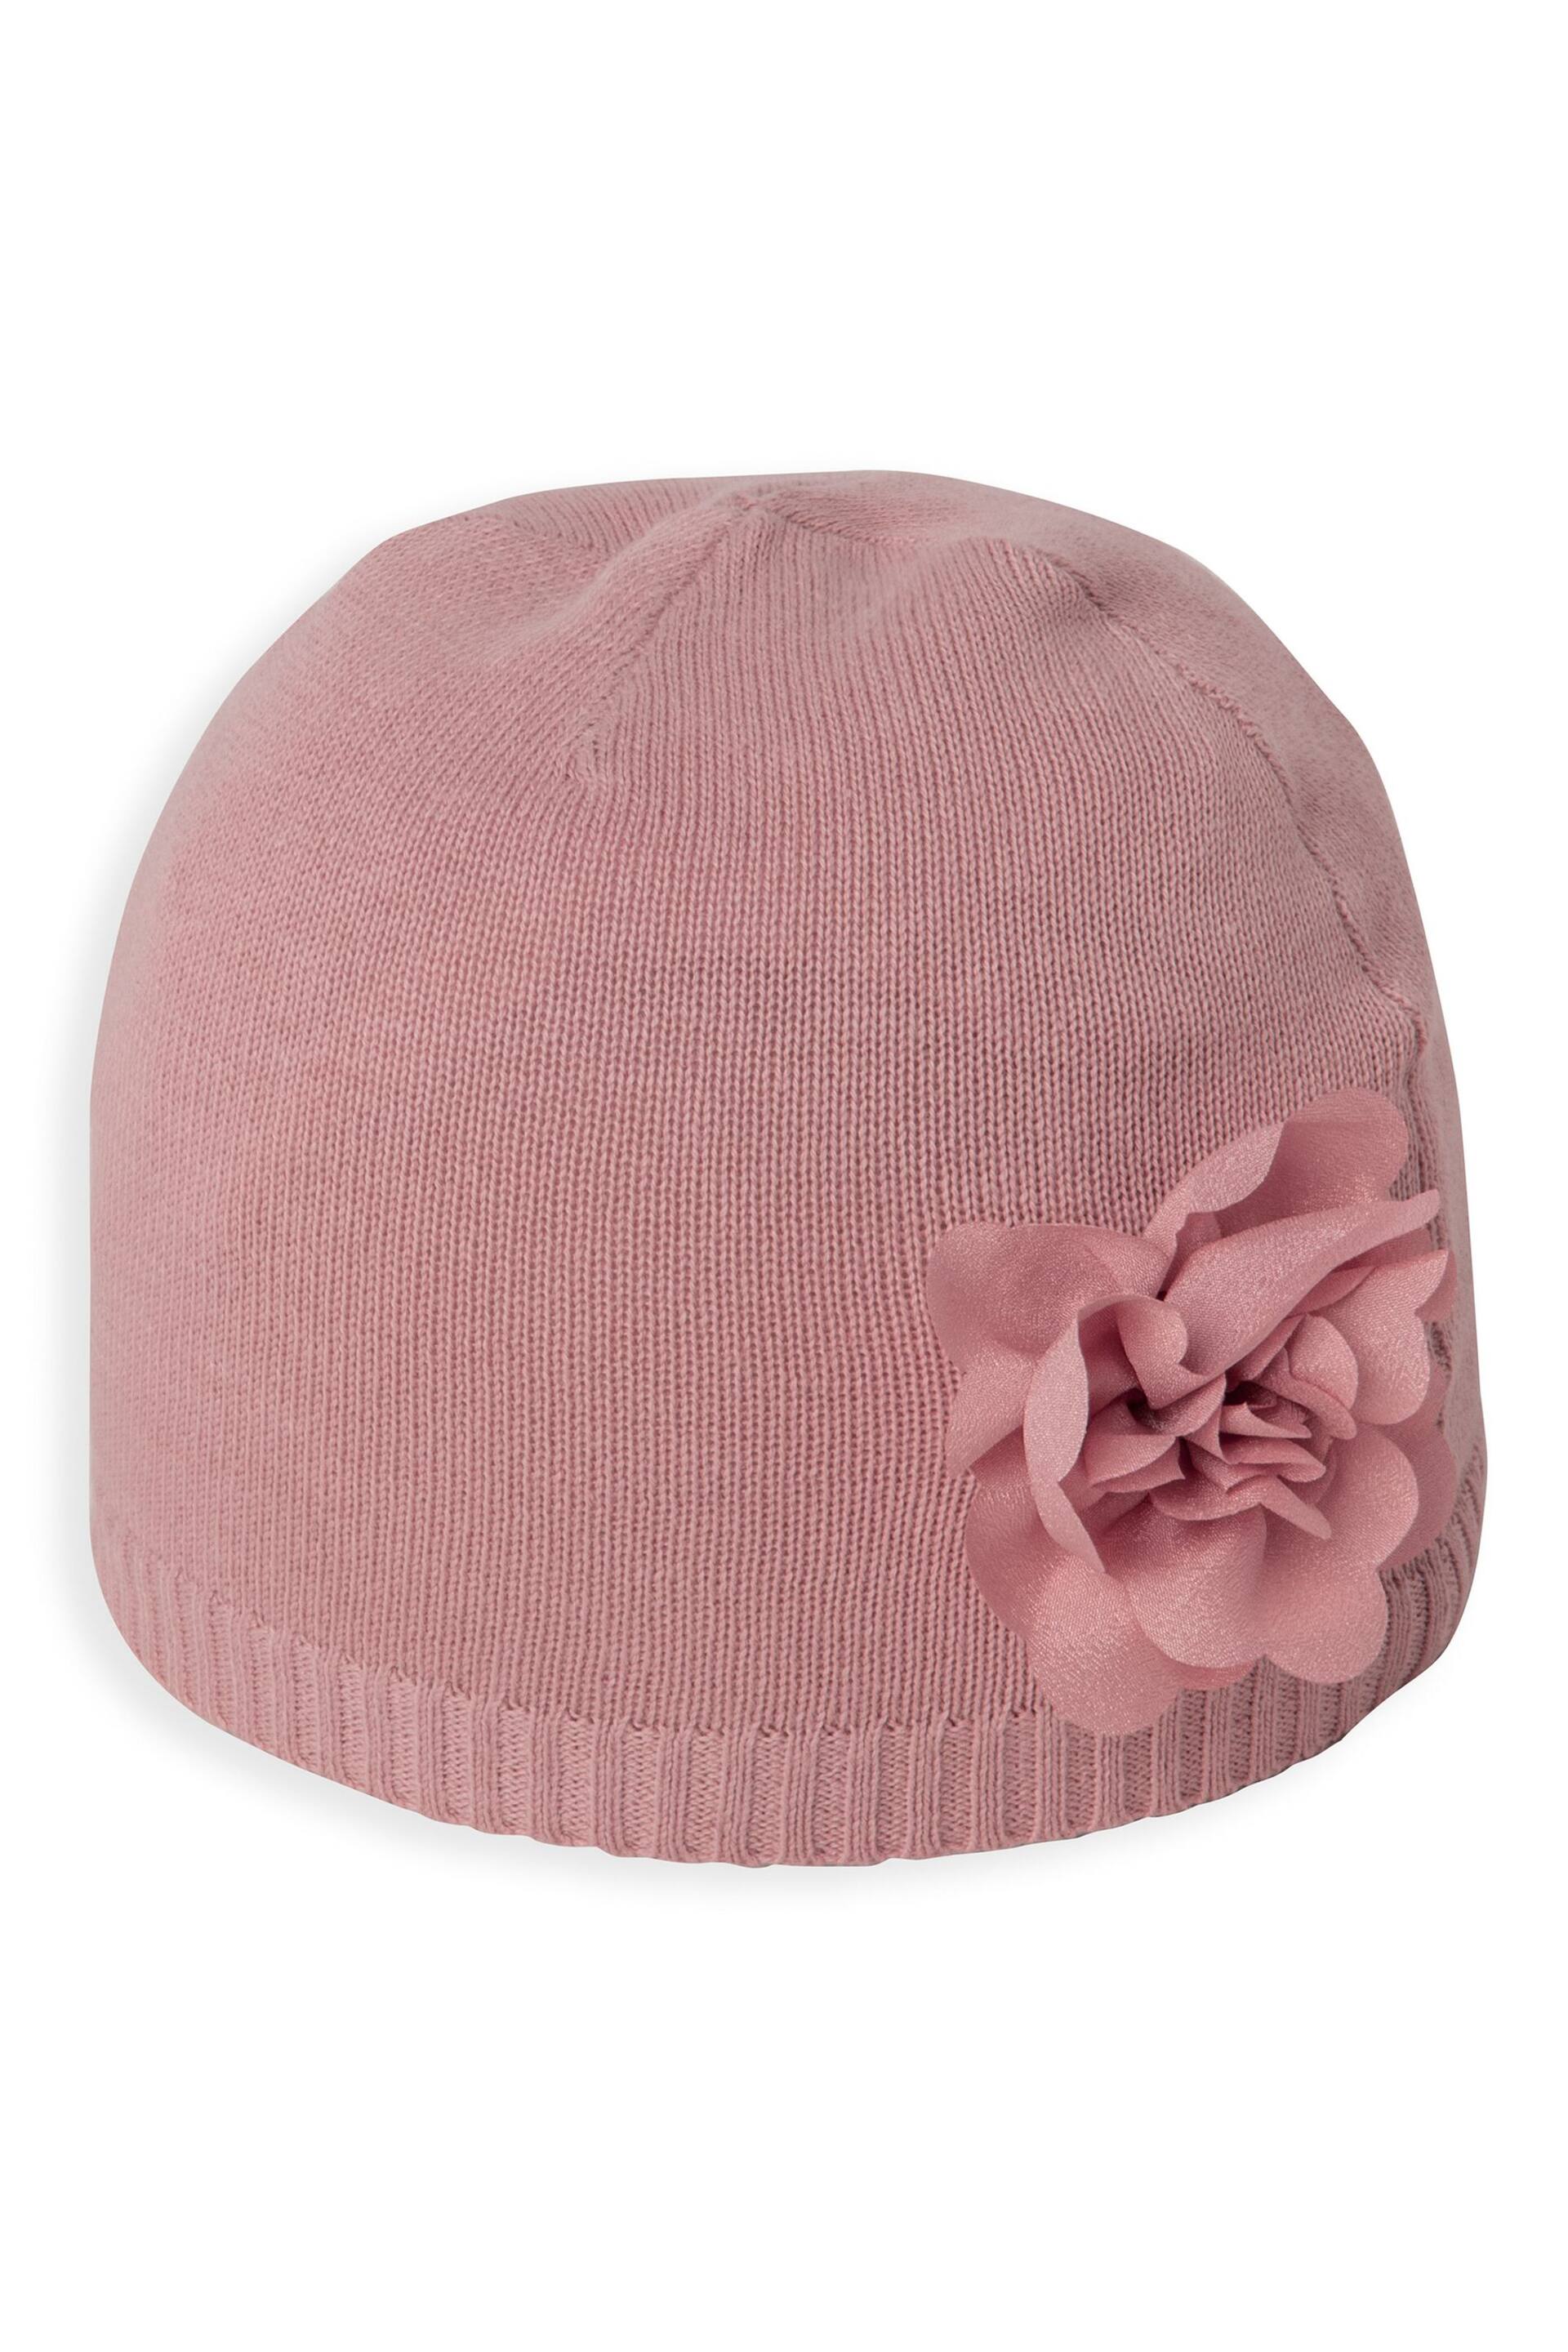 Mamas & Papas Girls Pink Flower Knit Hat and Booties - Image 2 of 3